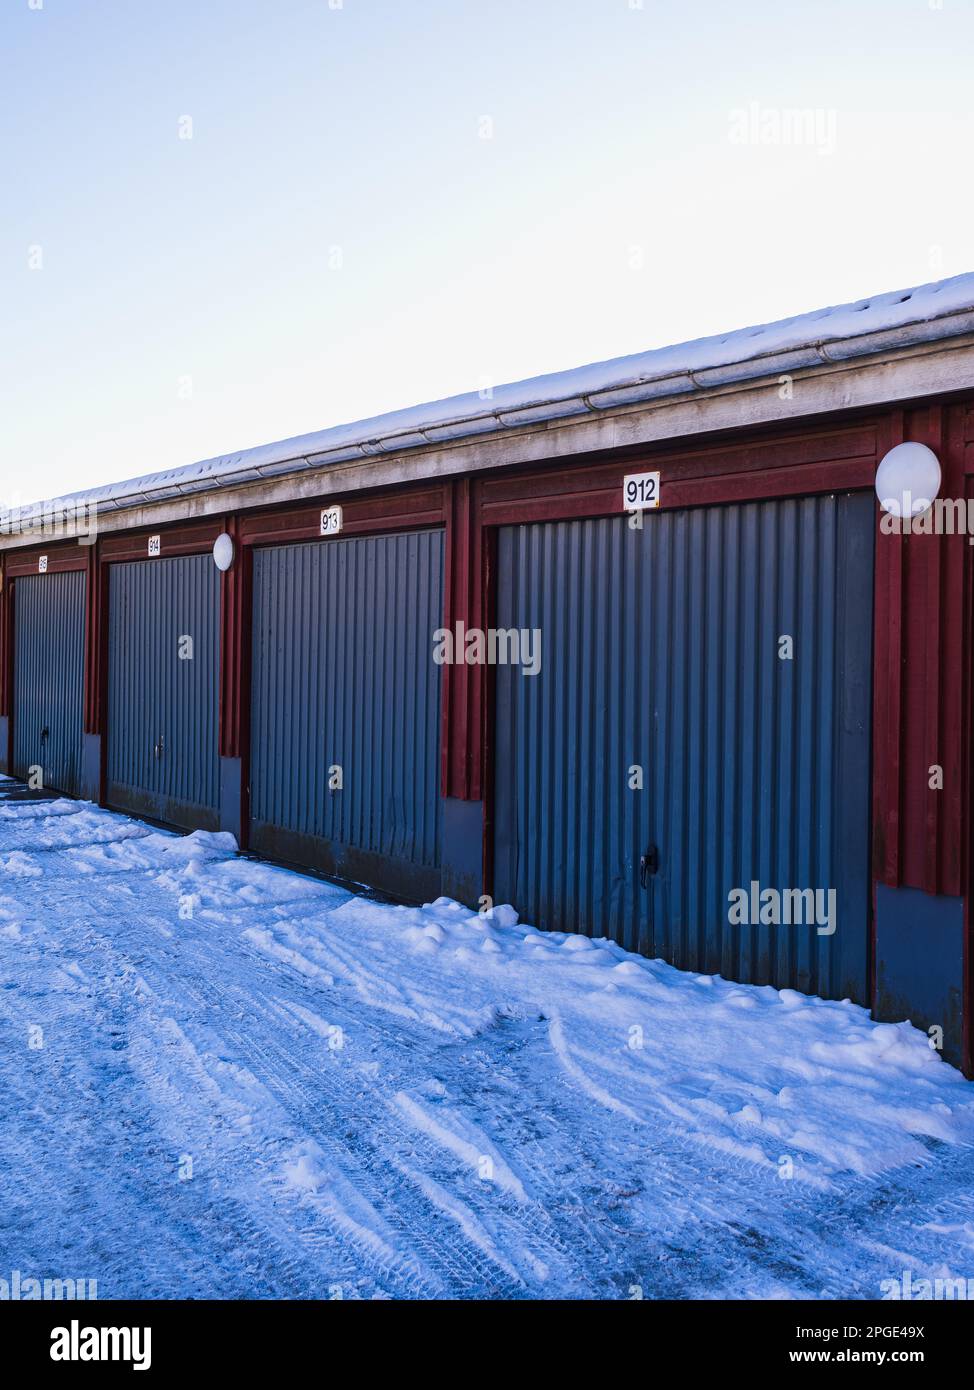 Rows of colorful garages in Sweden, blanketed by the fresh snowfall on a cold winter day beneath clear blue skies. Stock Photo